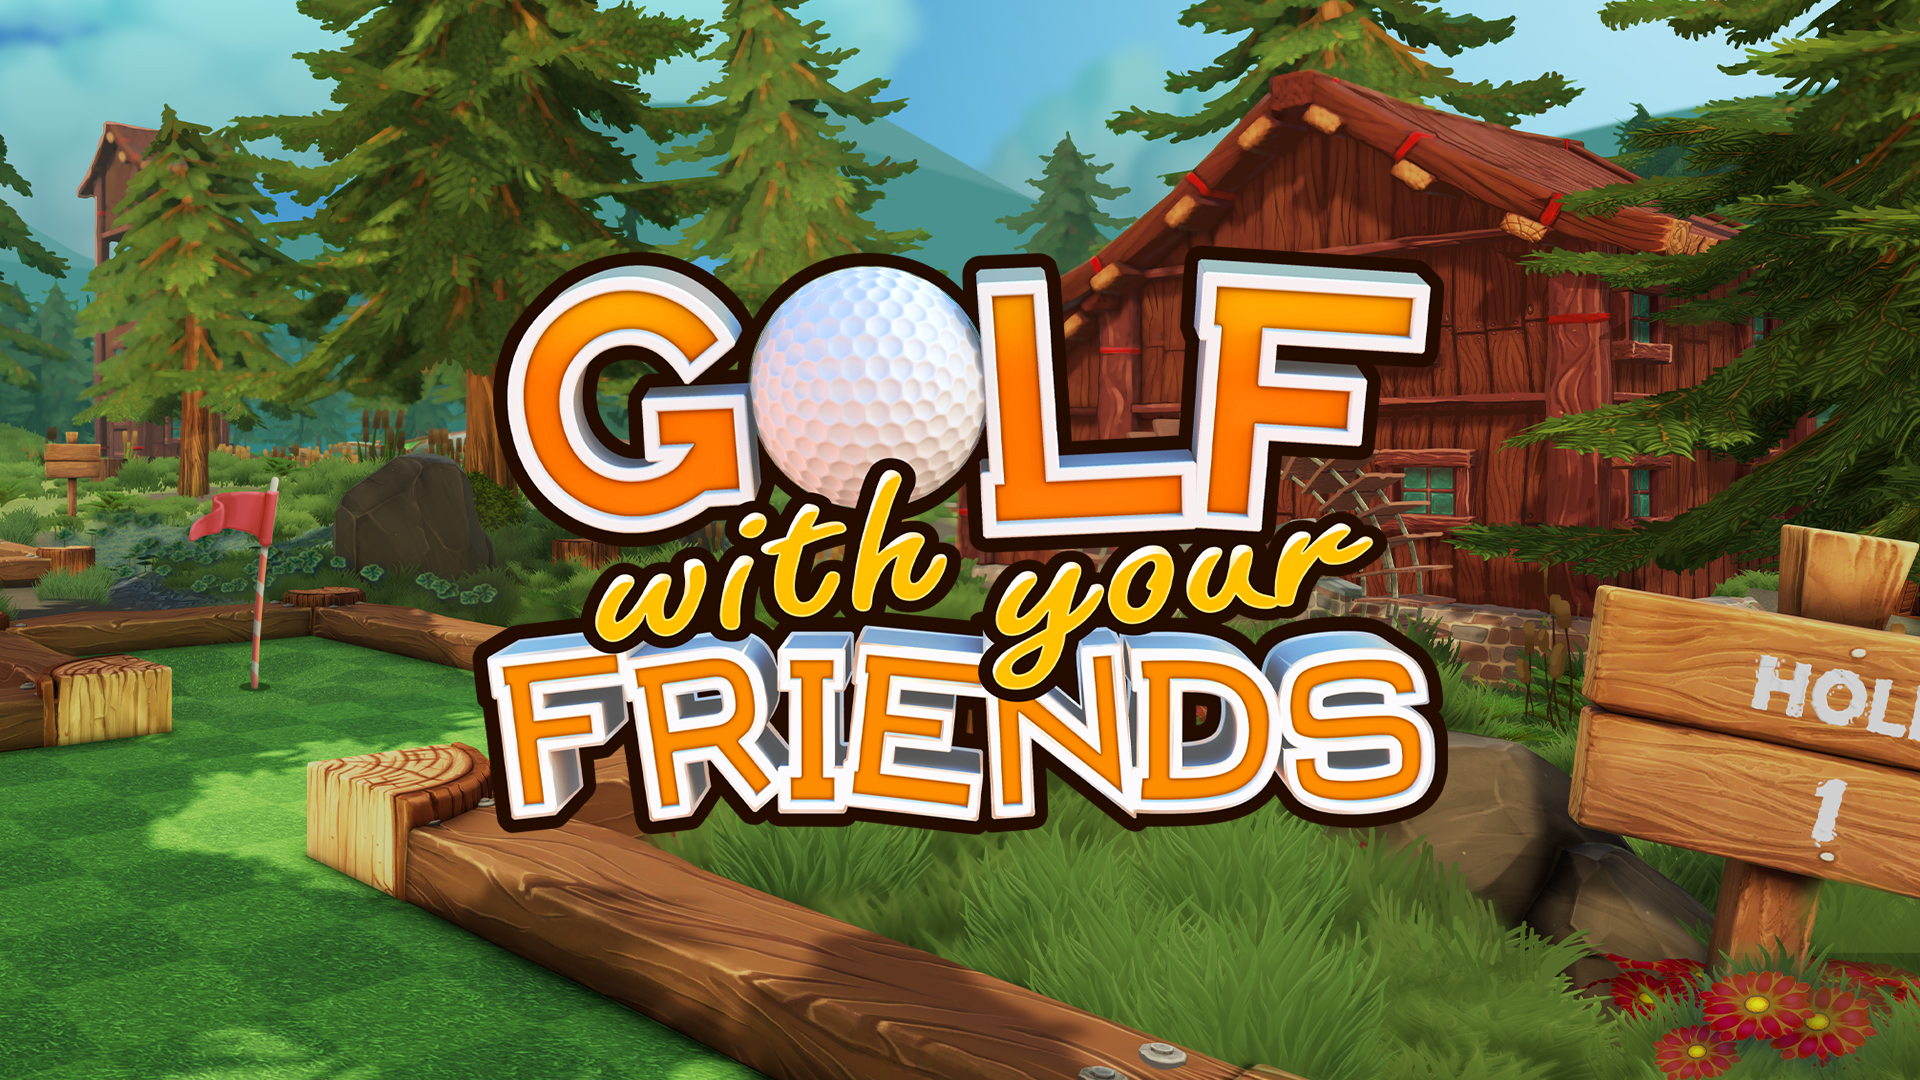 Your friends close. Golf with your friends. Игра гольф кооператив. Golf with your friends ps4. Кооп игры с гольфом.